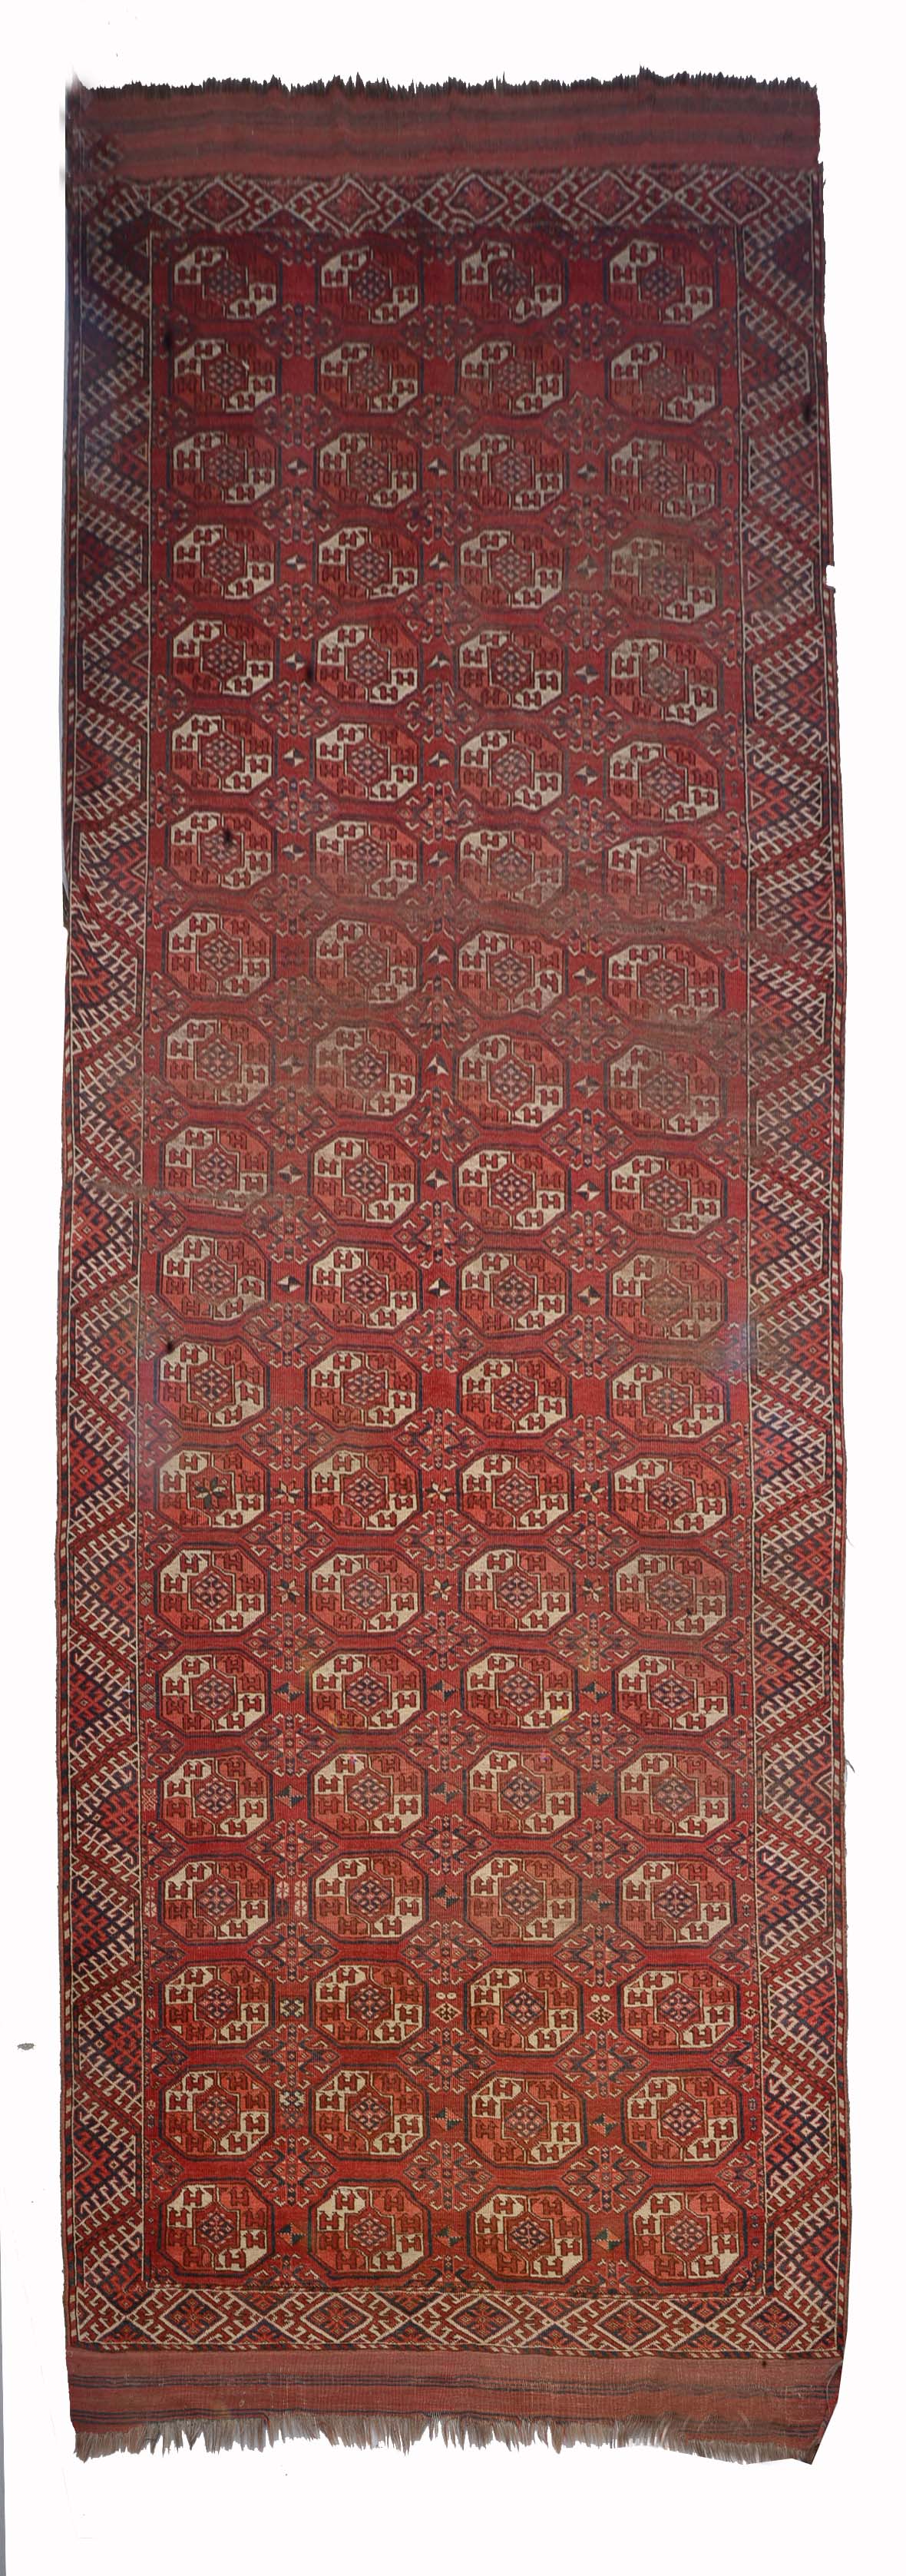 A TURKOMAN KIZIL AYAK  BRICK RED GROUND CARPET decorated four rows of octagons within a hooked